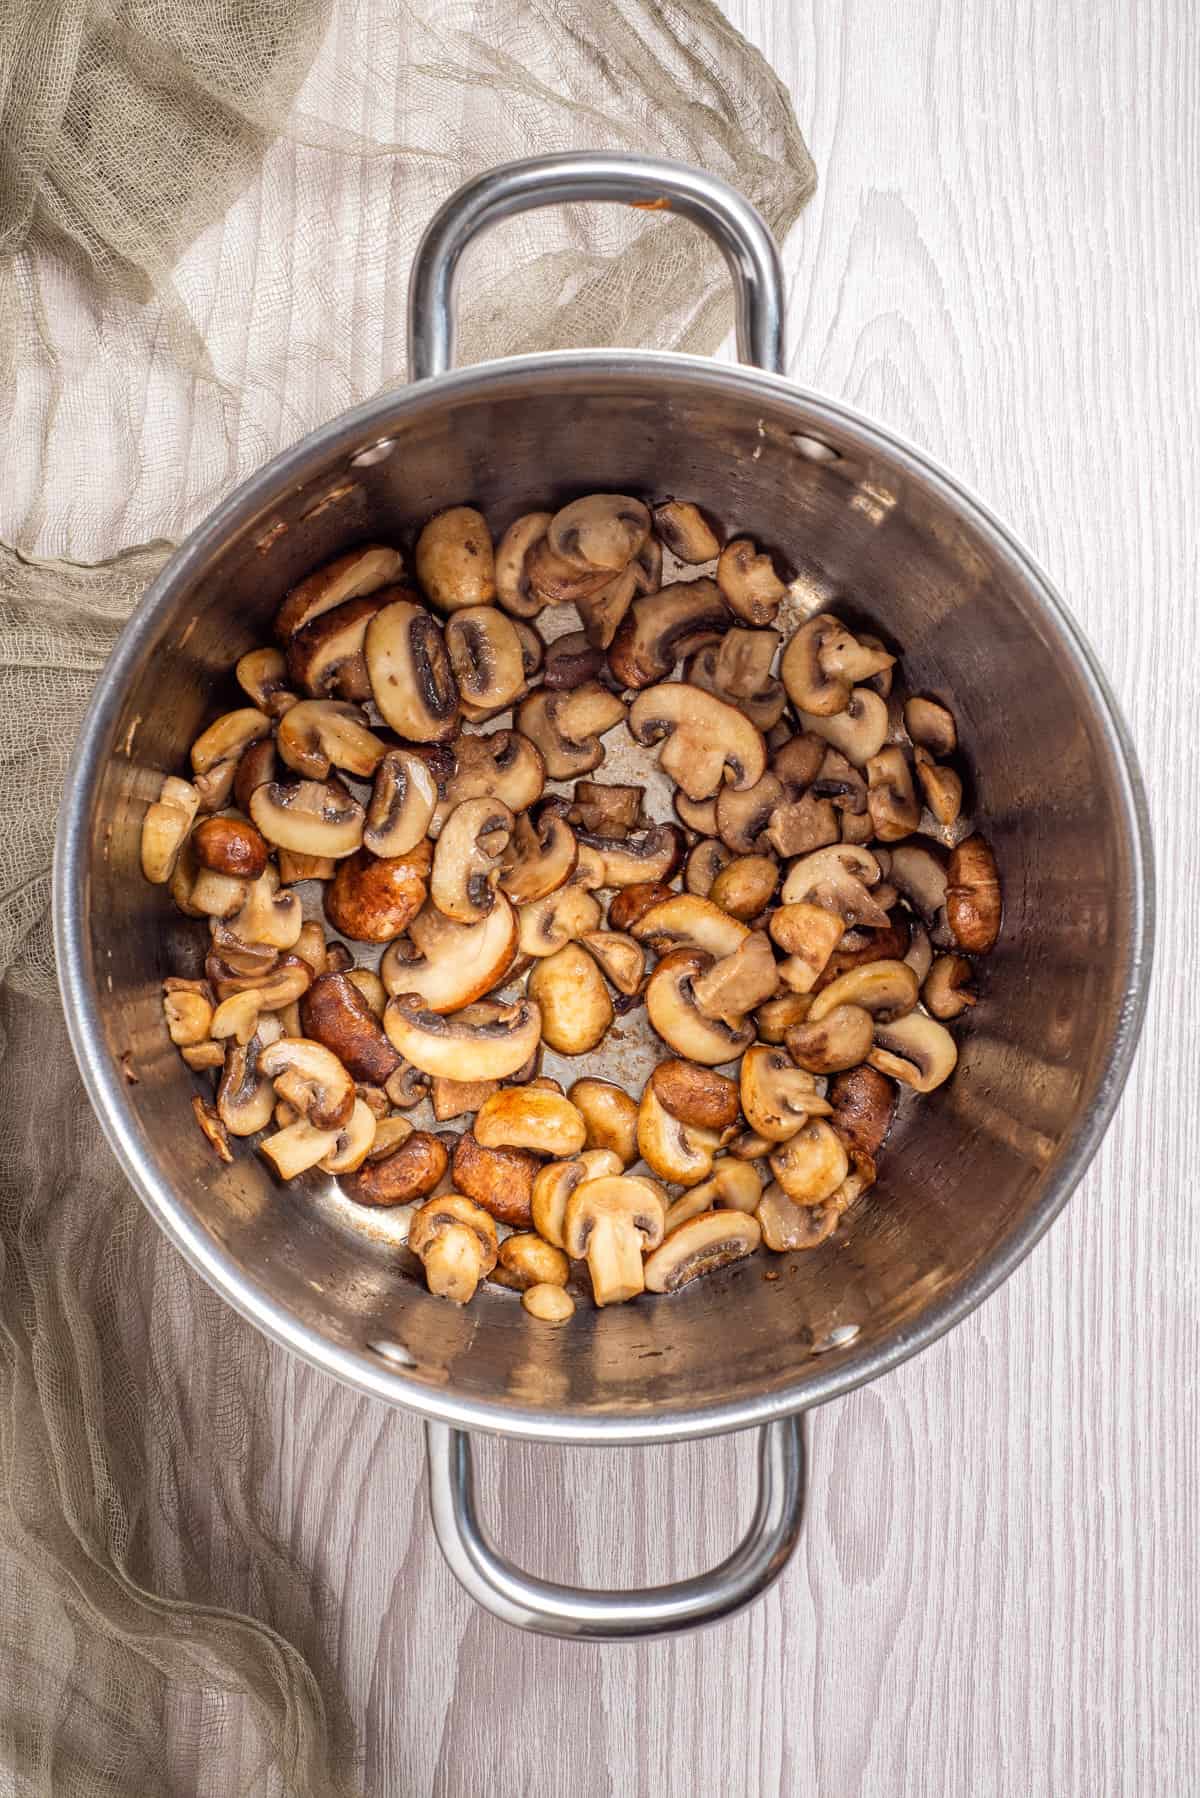 An image of mushrooms in a pot.